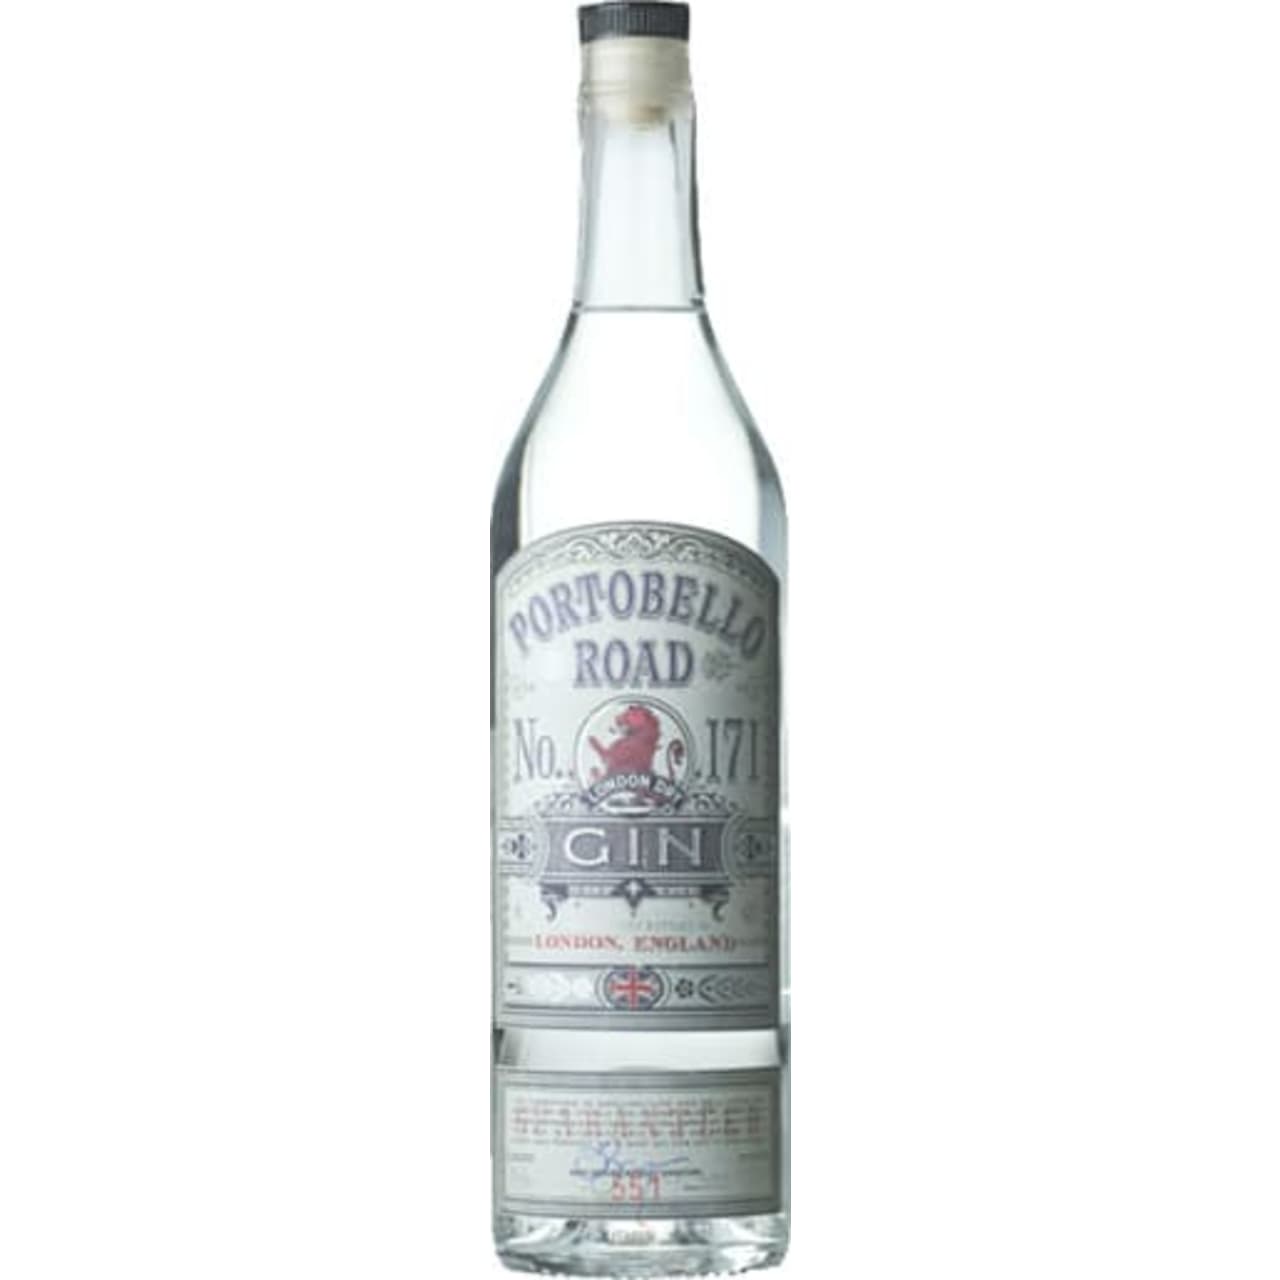 This bottle of Portobello Road Gin 171 was created by the award-winning licensed victualers of the Ginstitute Messrs. Gerard Feltham, Jake F Burger and Paul Andrew Lane. Each individually numbered bottle bearing a triptych of their unique signatures.